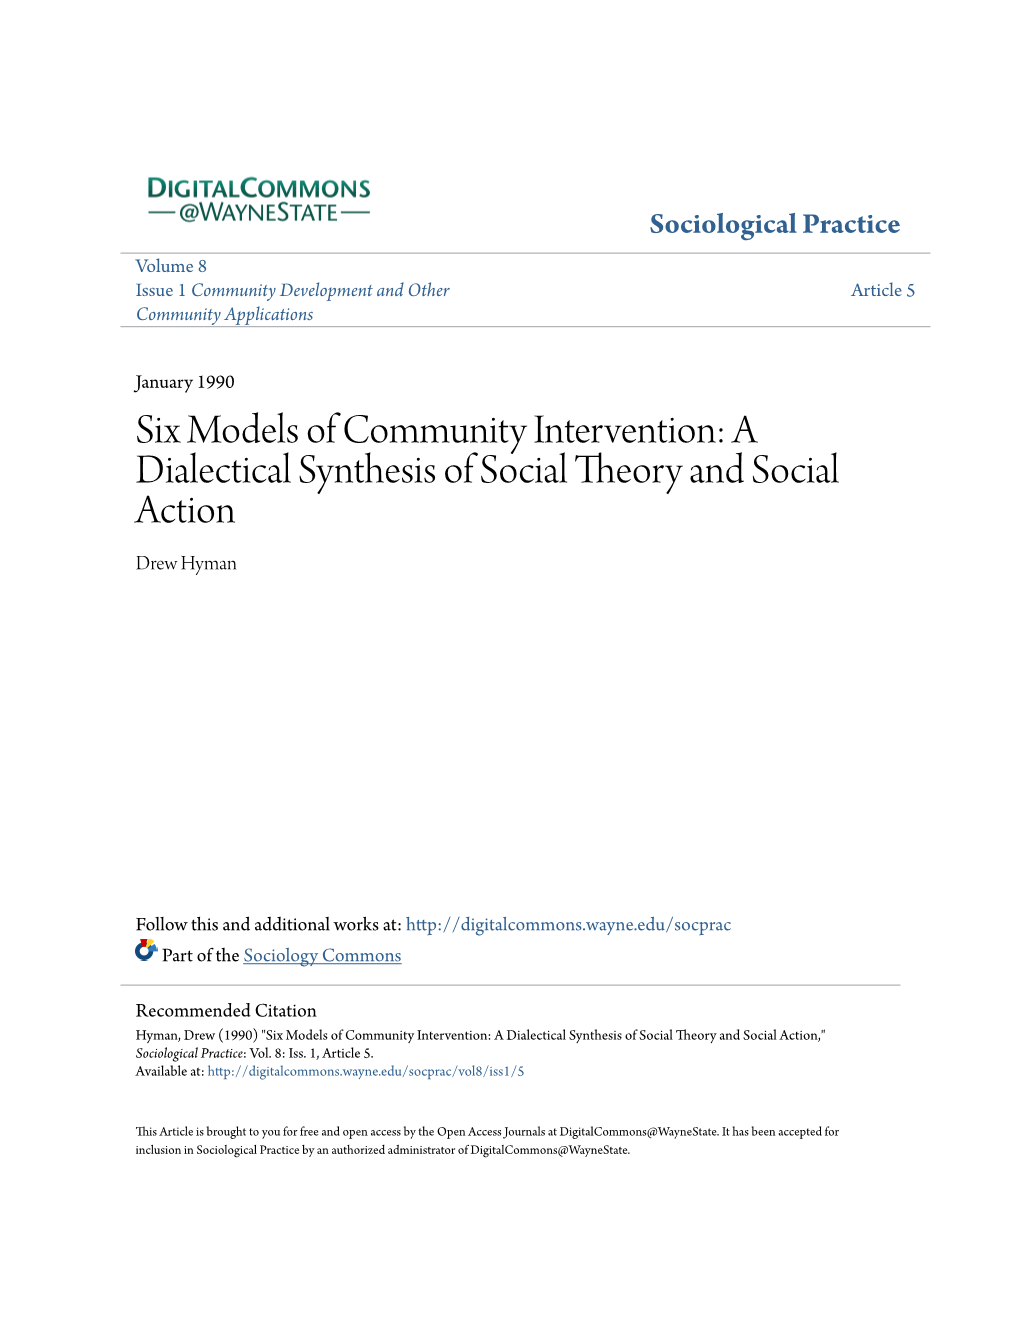 Six Models of Community Intervention: a Dialectical Synthesis of Social Theory and Social Action Drew Hyman